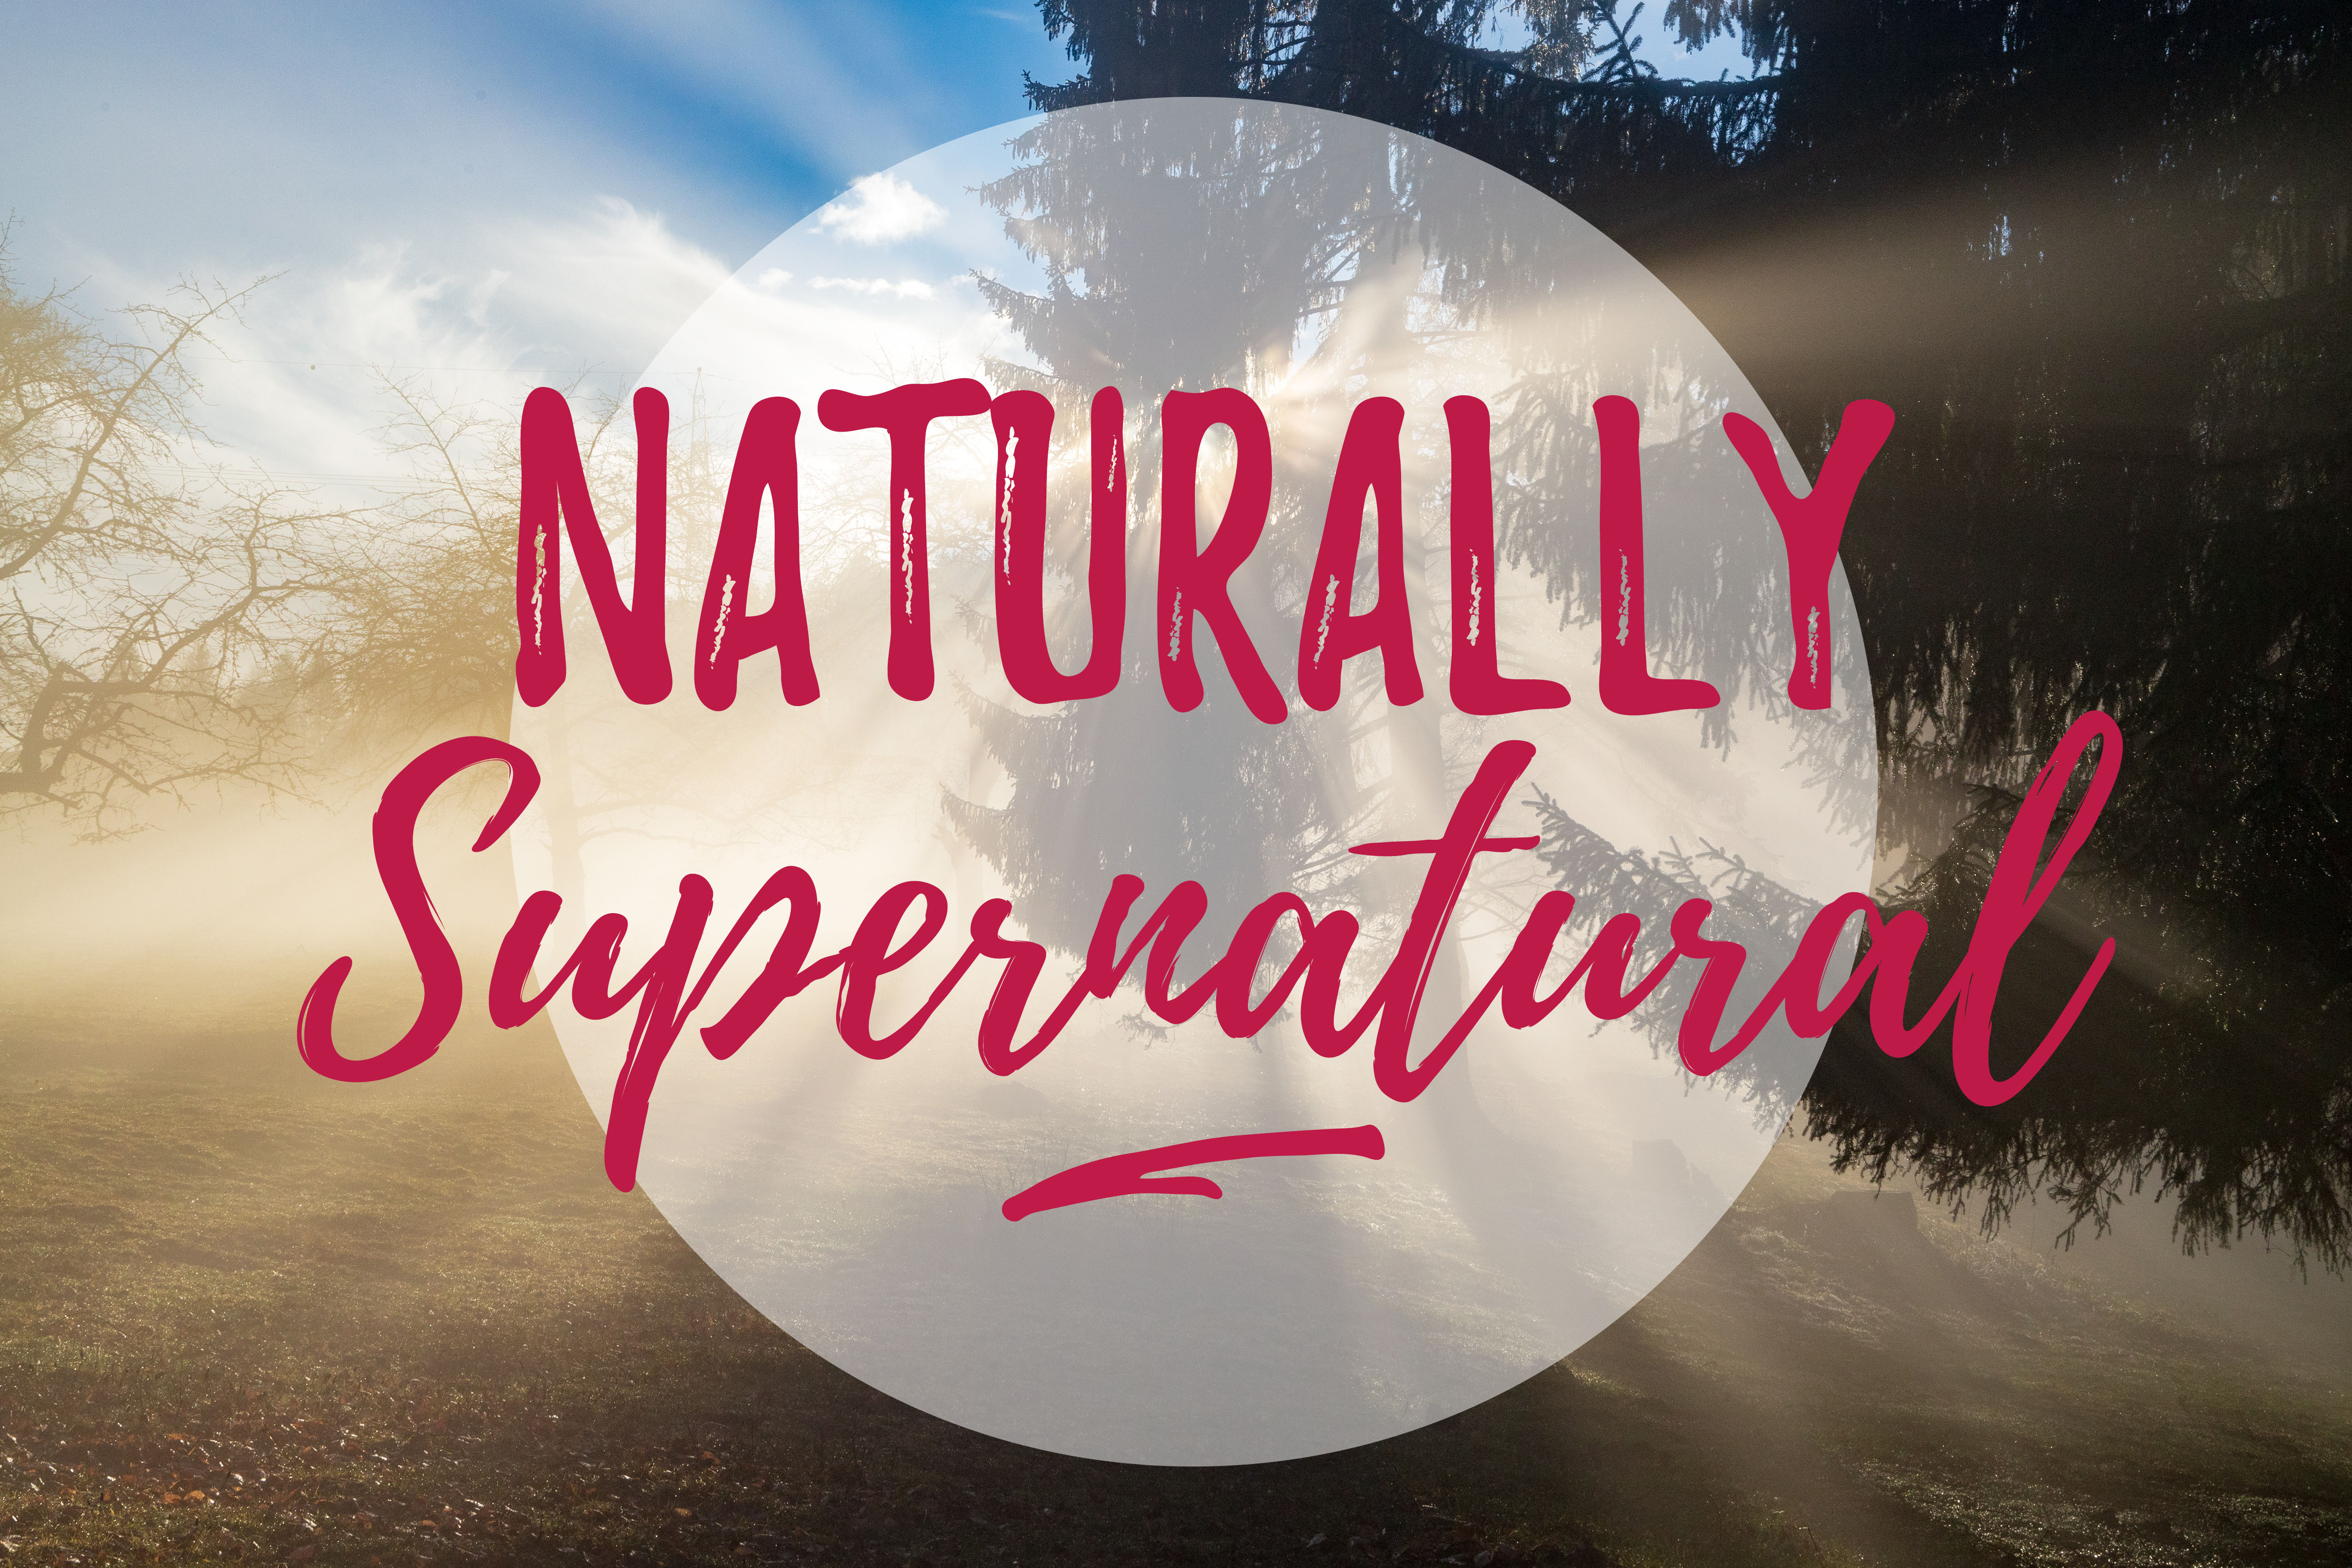 [Naturally Supernatural] Journey’s End!